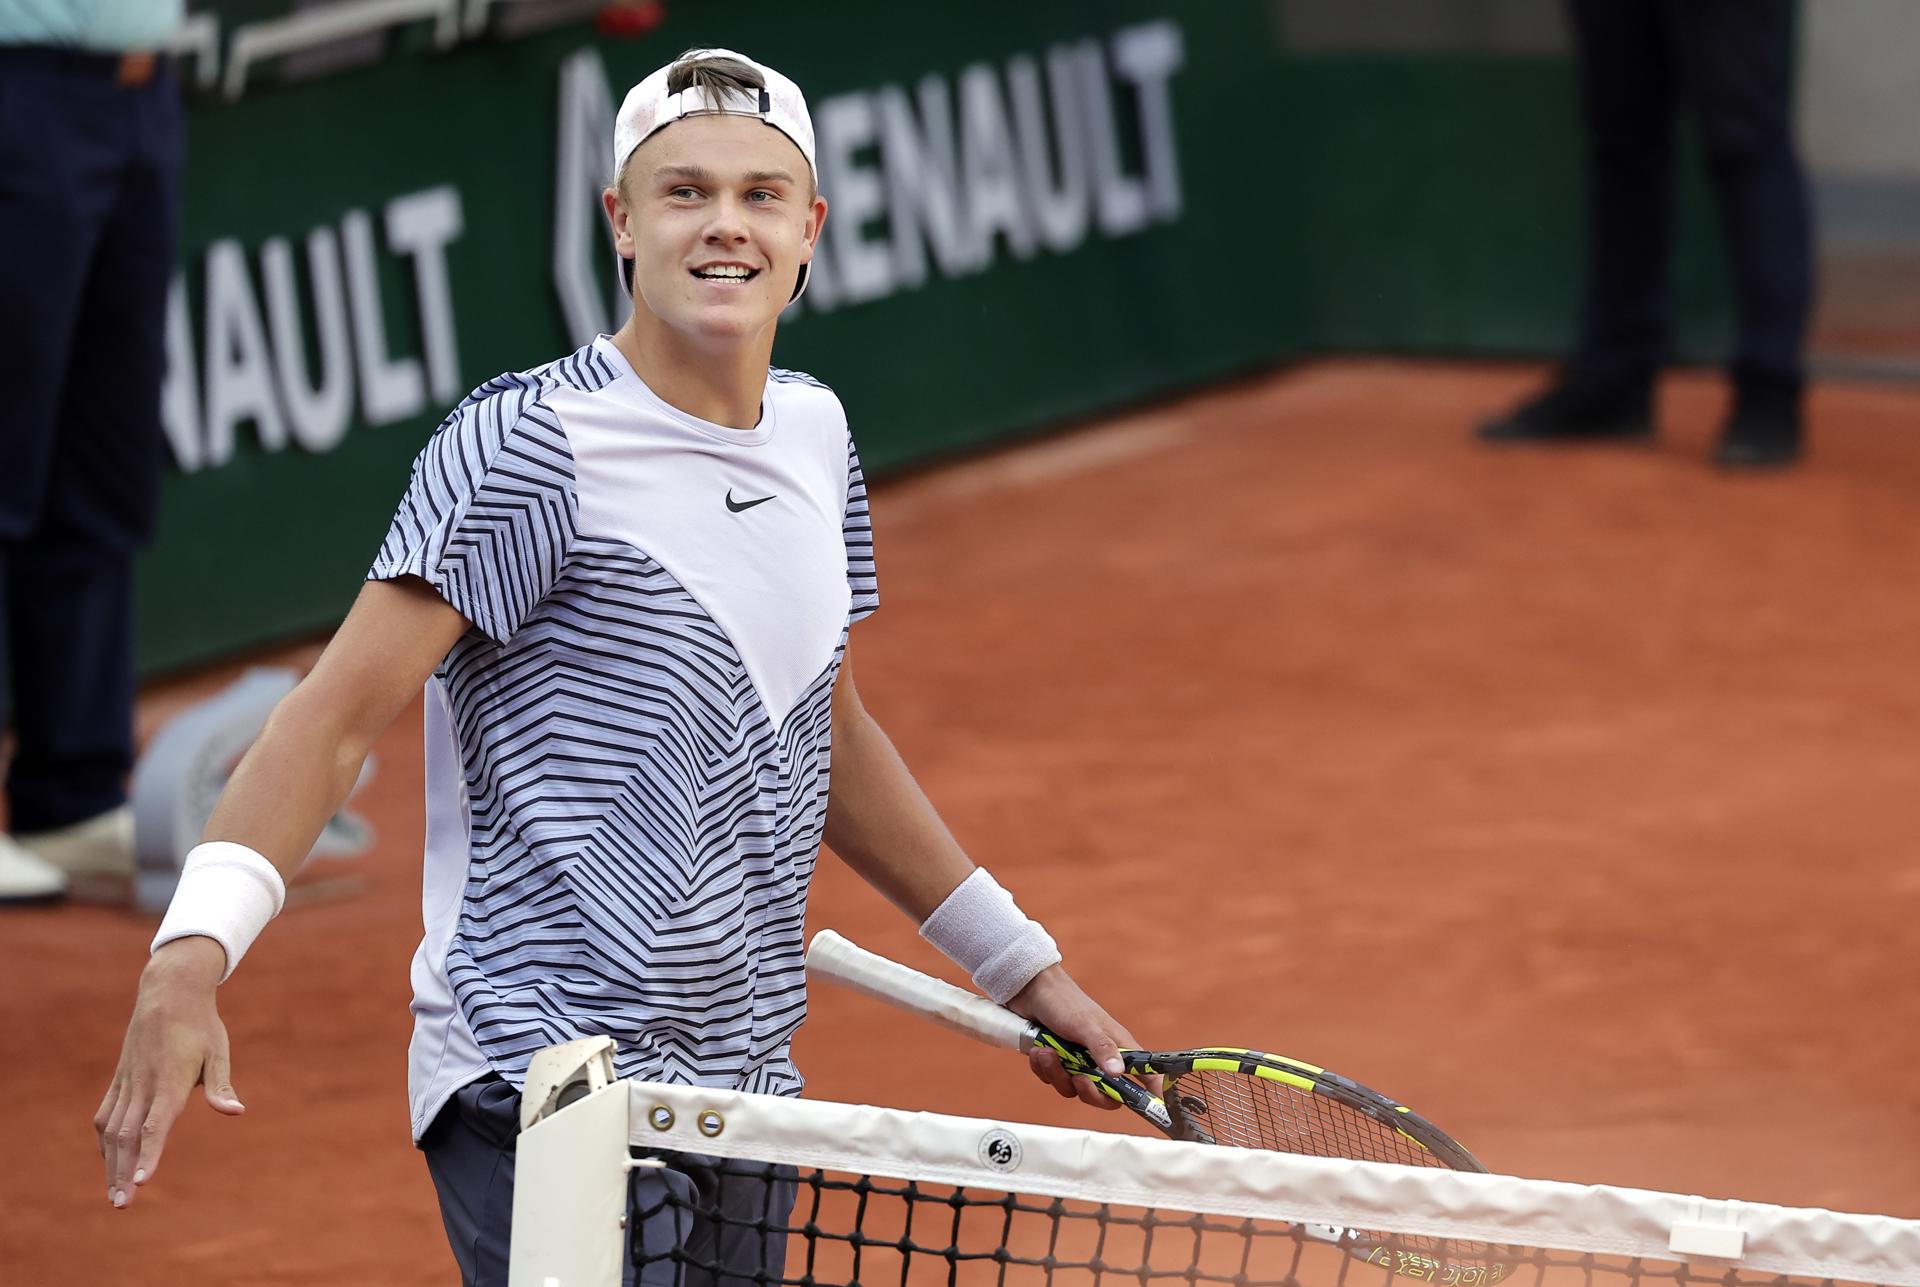 Holger Rune of Denmark smiles after defeating Argentina's Francisco Cerundolo 7-6 (7-3), 3-6, 6-4, 1-6, 7-6 (10-7) in French Open fourth-round action in Paris, France on 5 June 2023. EFE/EPA/CHRISTOPHE PETIT TESSON
